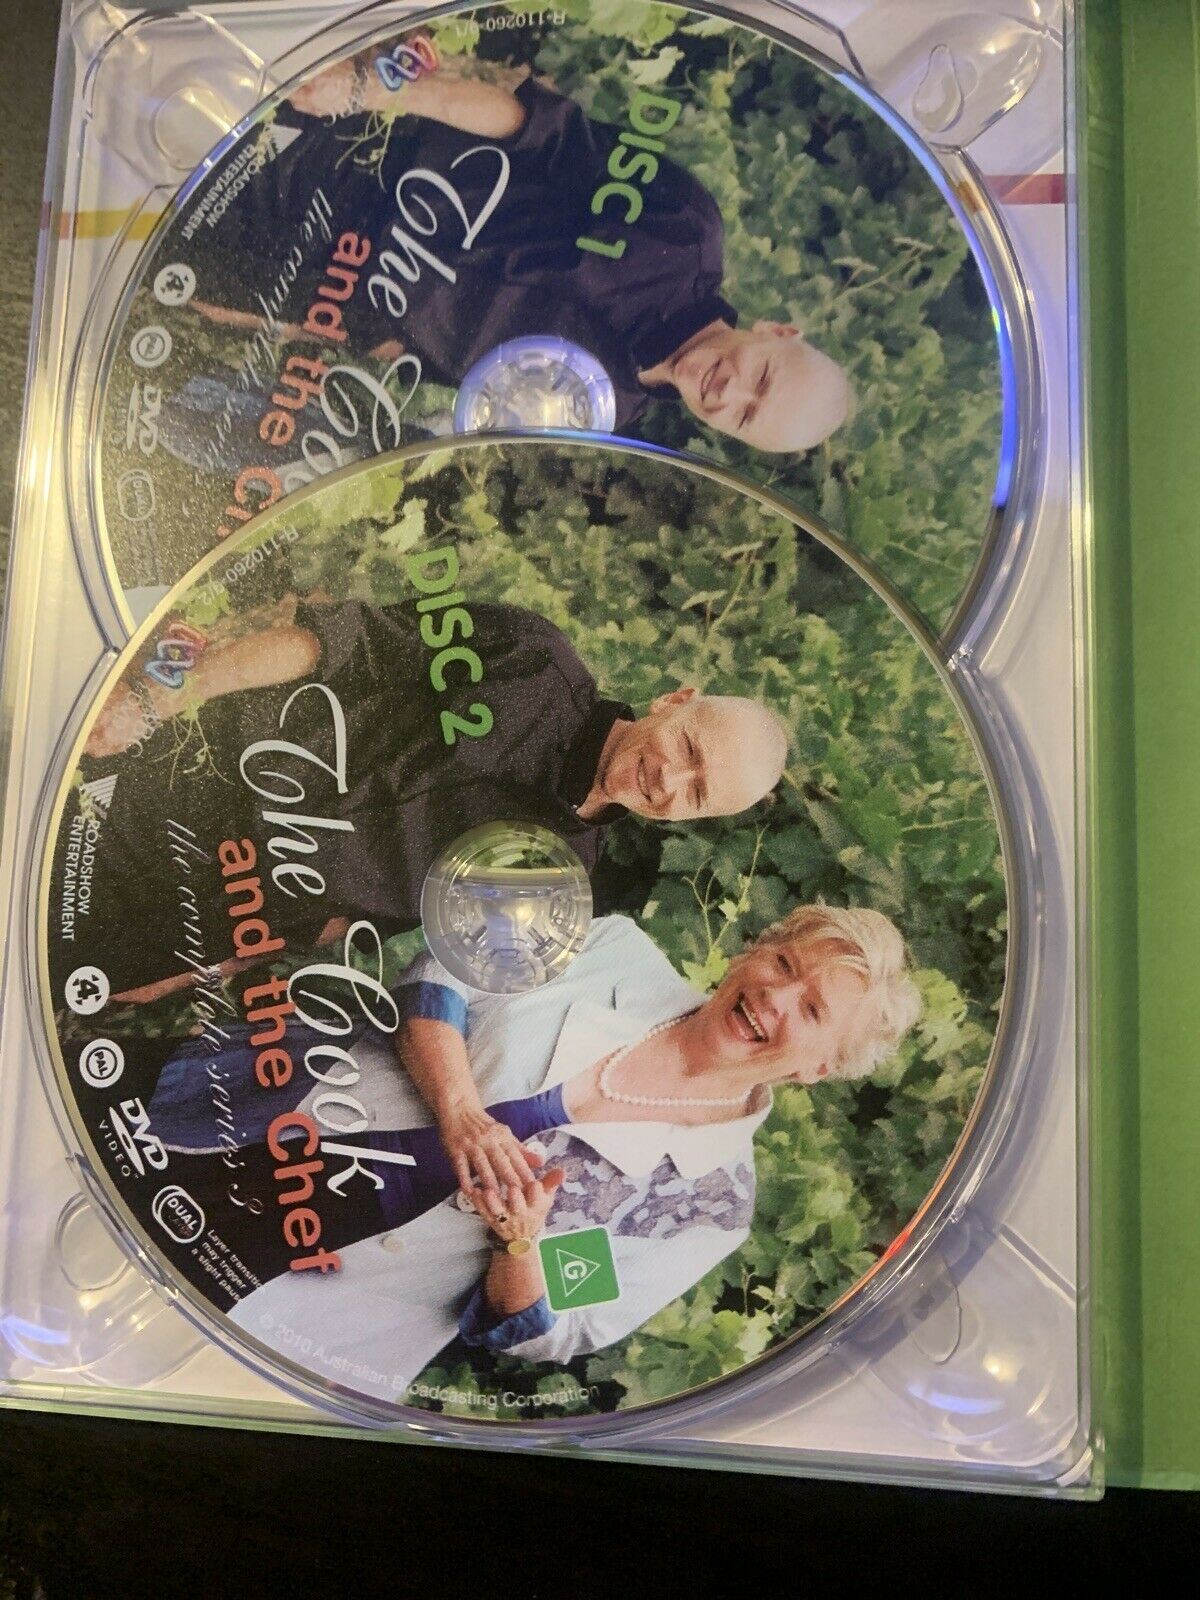 The Cook And The Chef : Series 3 (DVD, 2010, 8-Disc Set) Maggie Beer Region 4